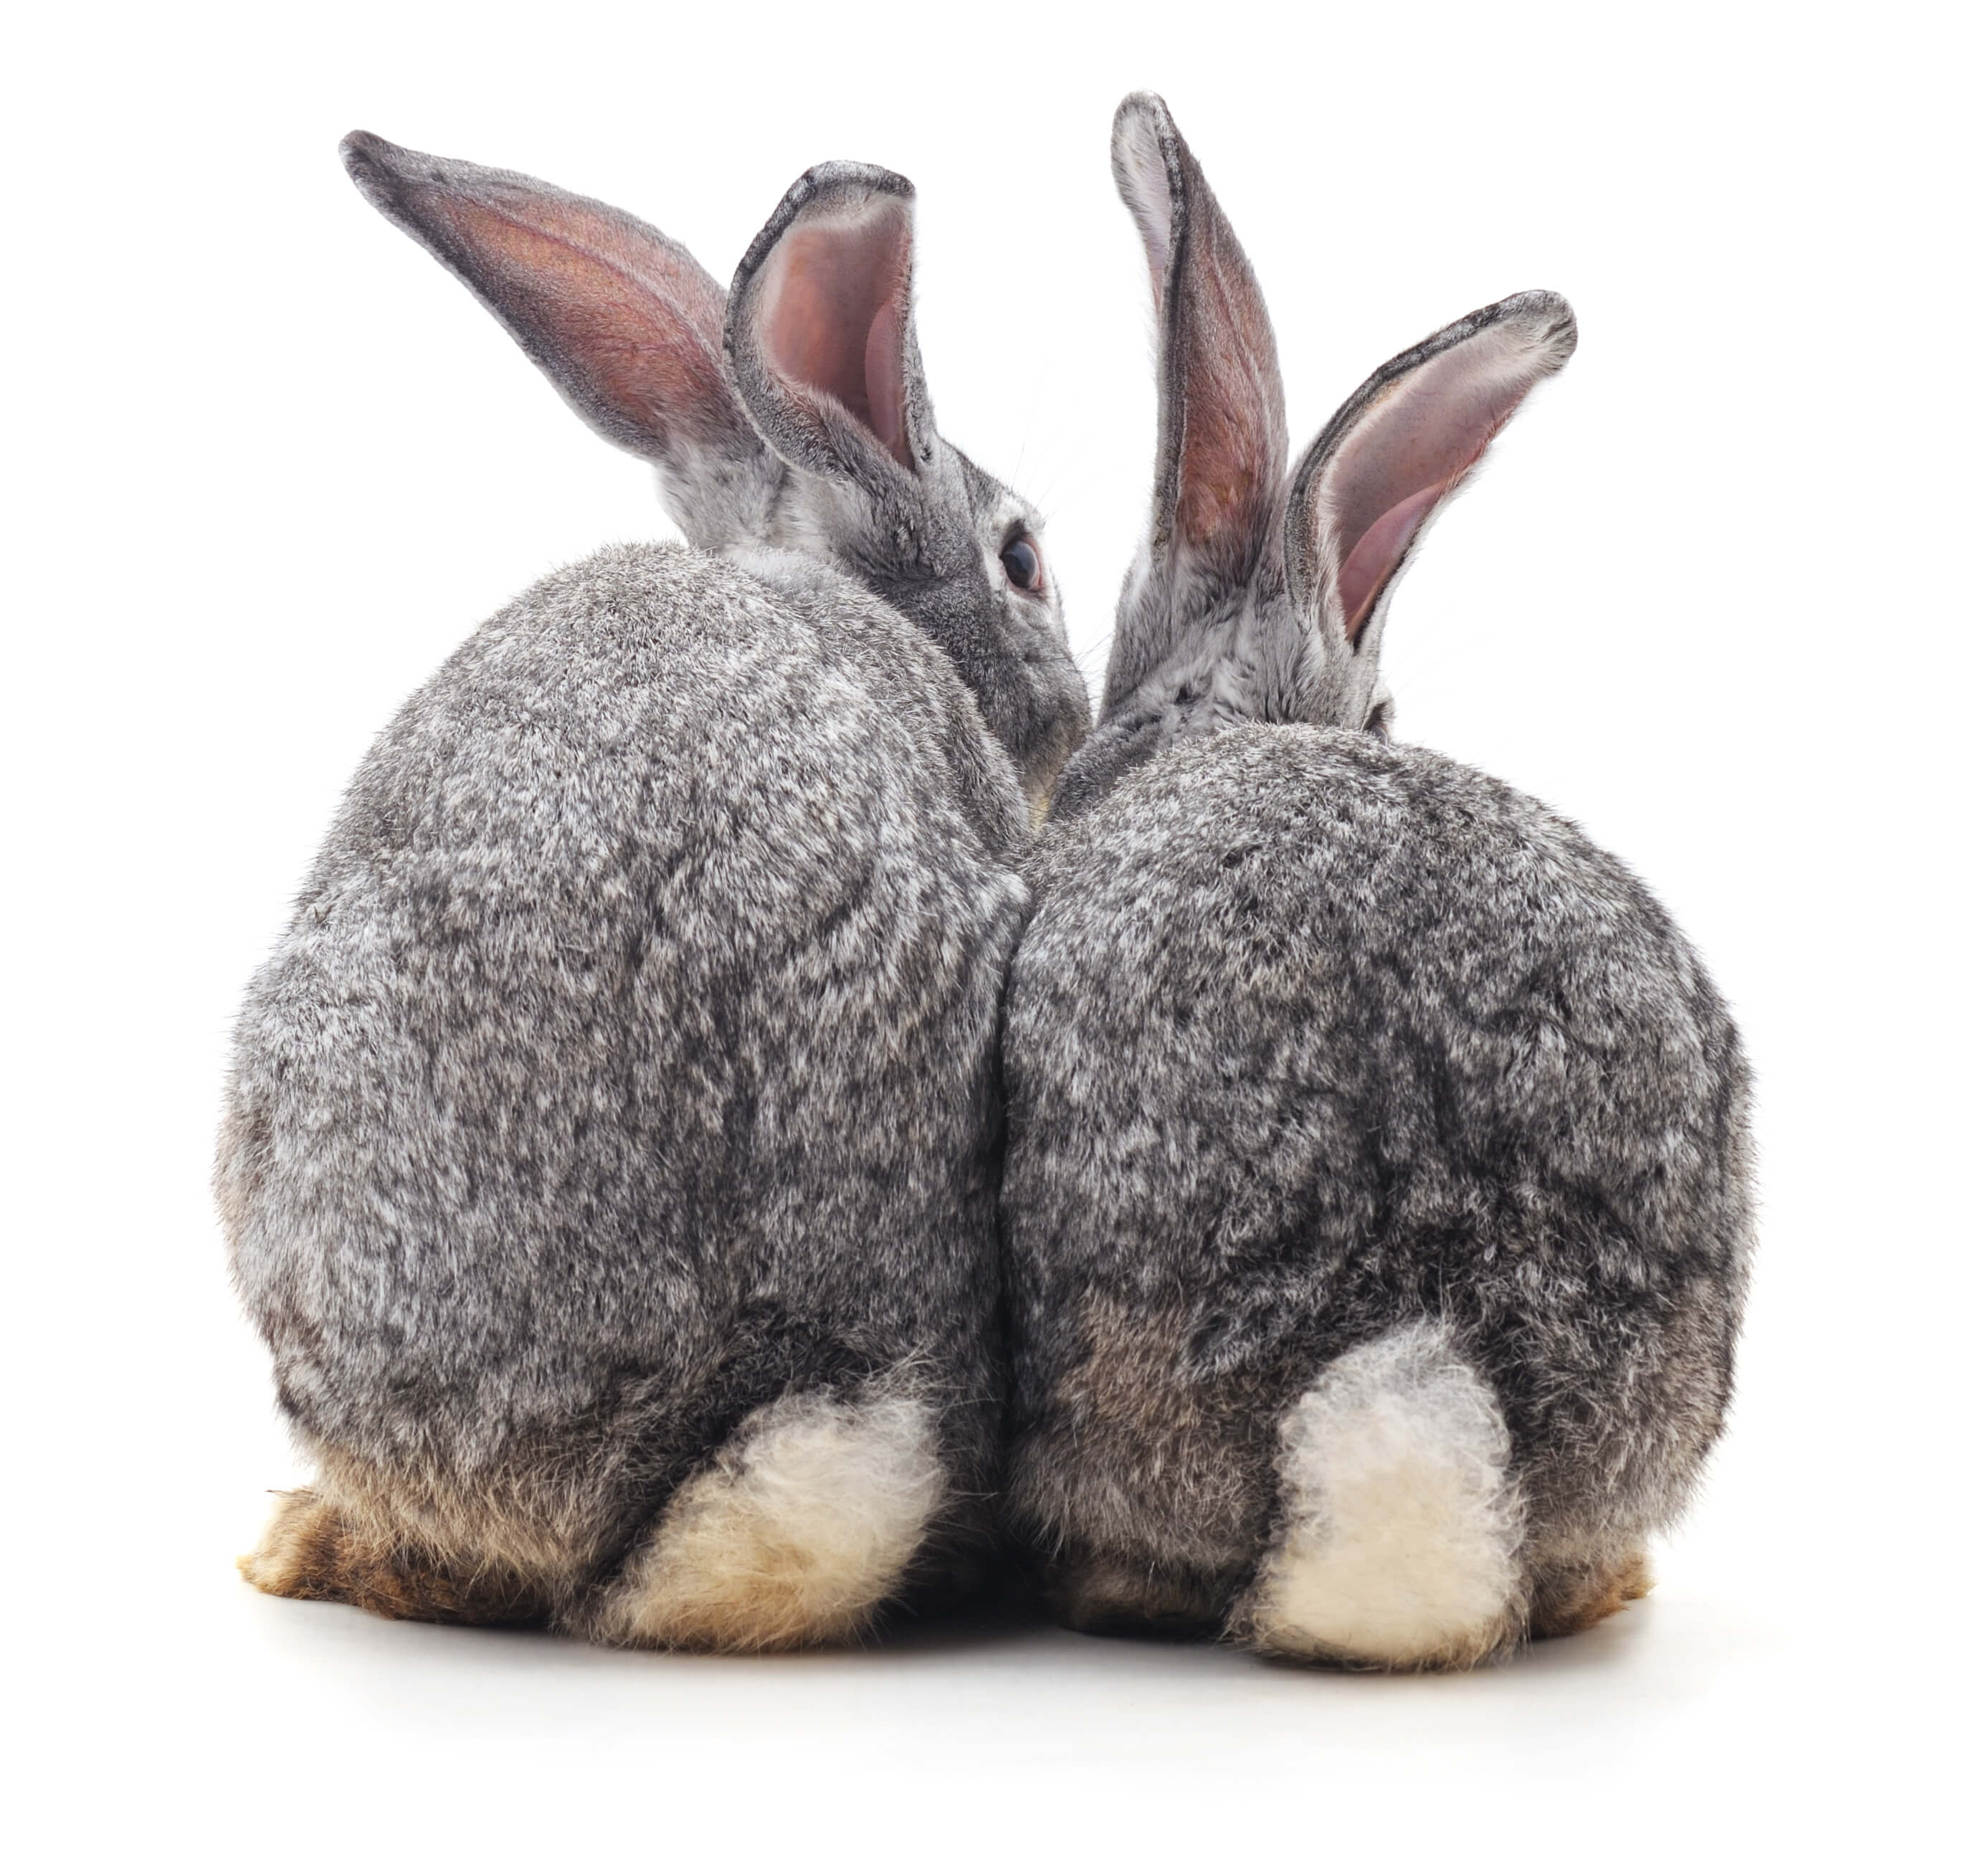 Bonding rabbits can seem like a mysterious process. Here are answers to some of the most common questions.